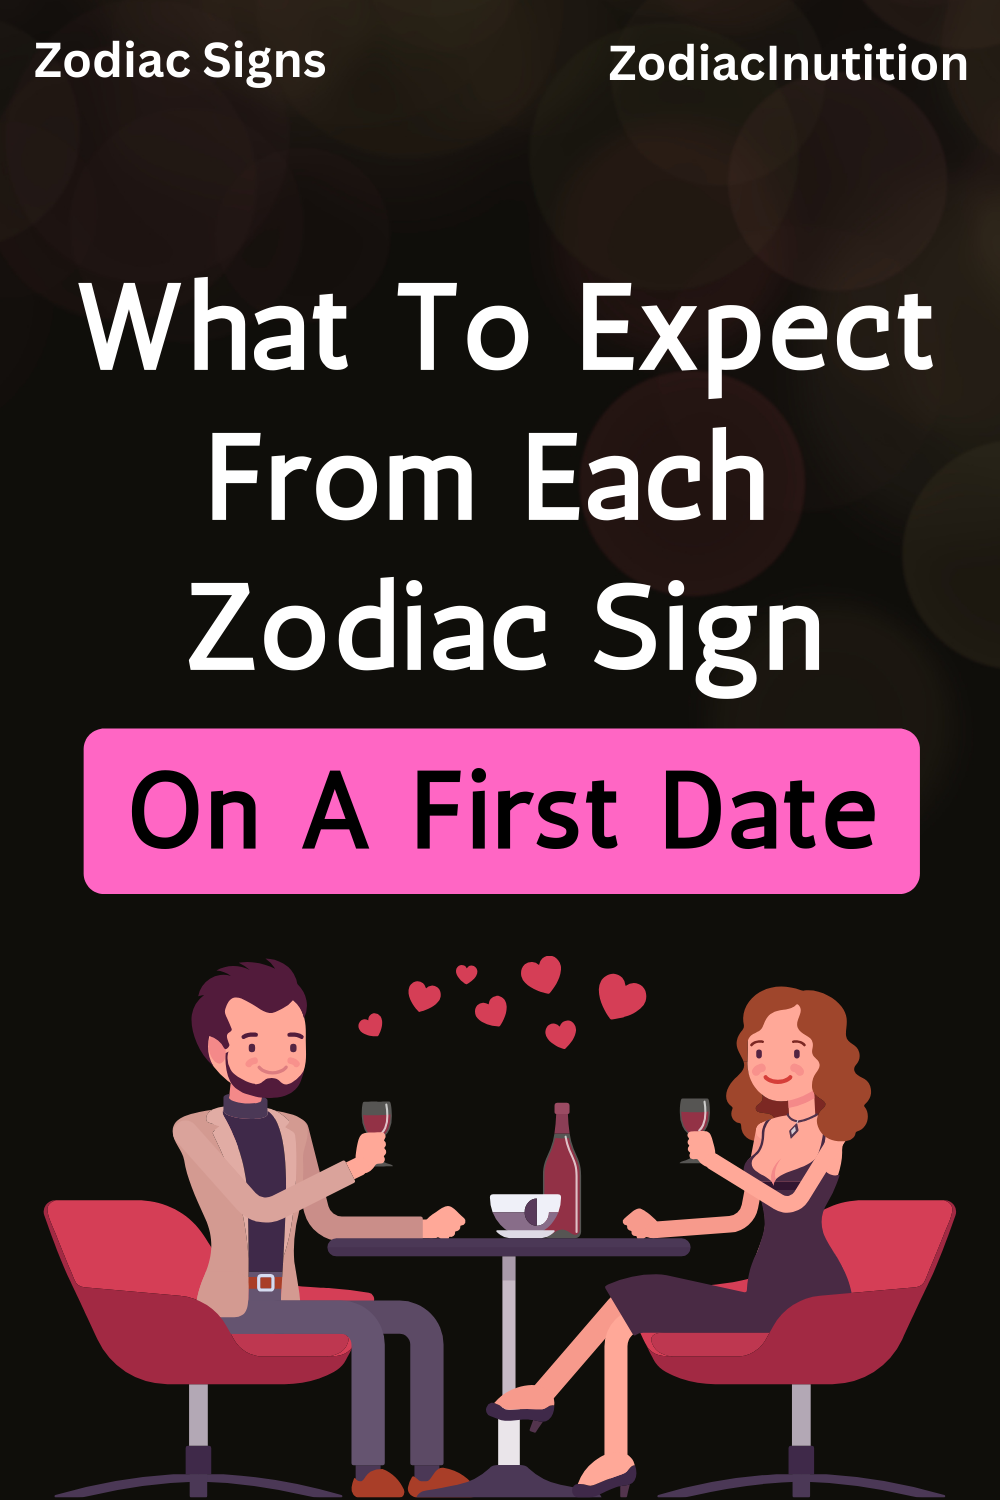 What To Expect From Each Zodiac Sign On A First Date